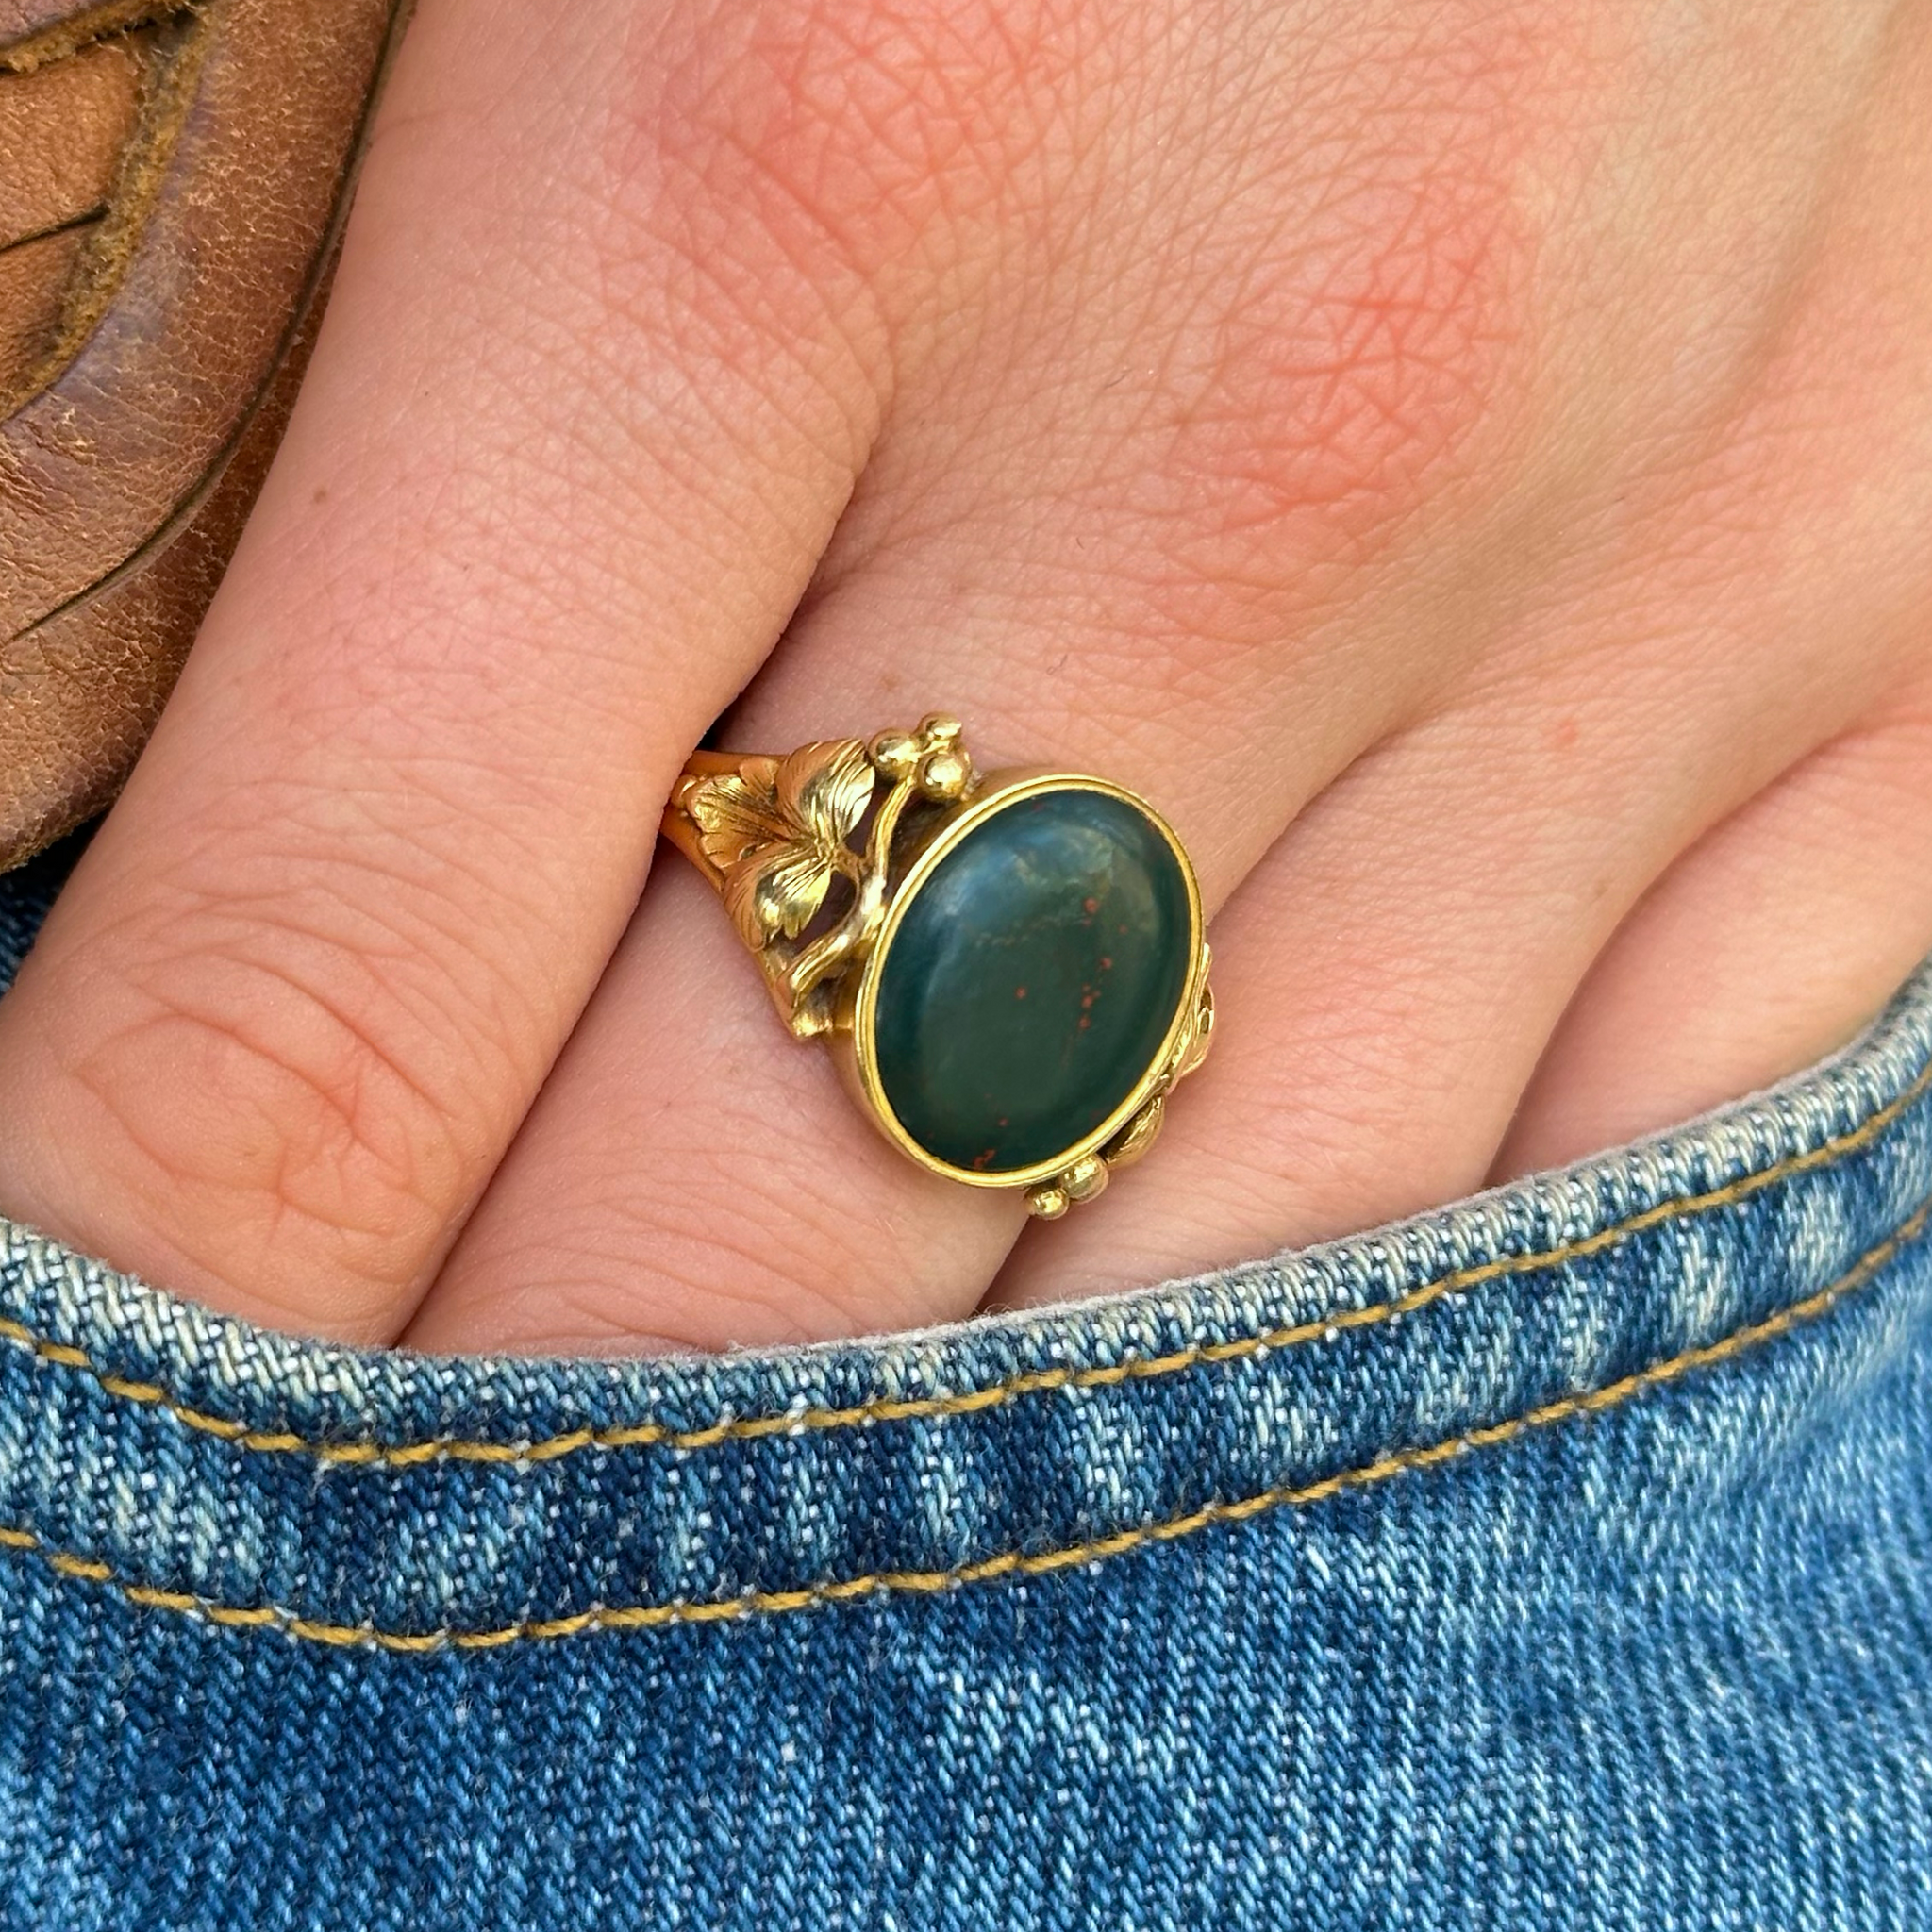 Antique, Victorian Bloodstone Signet Ring, 18ct Yellow Gold worn on hand in pocket of jeans